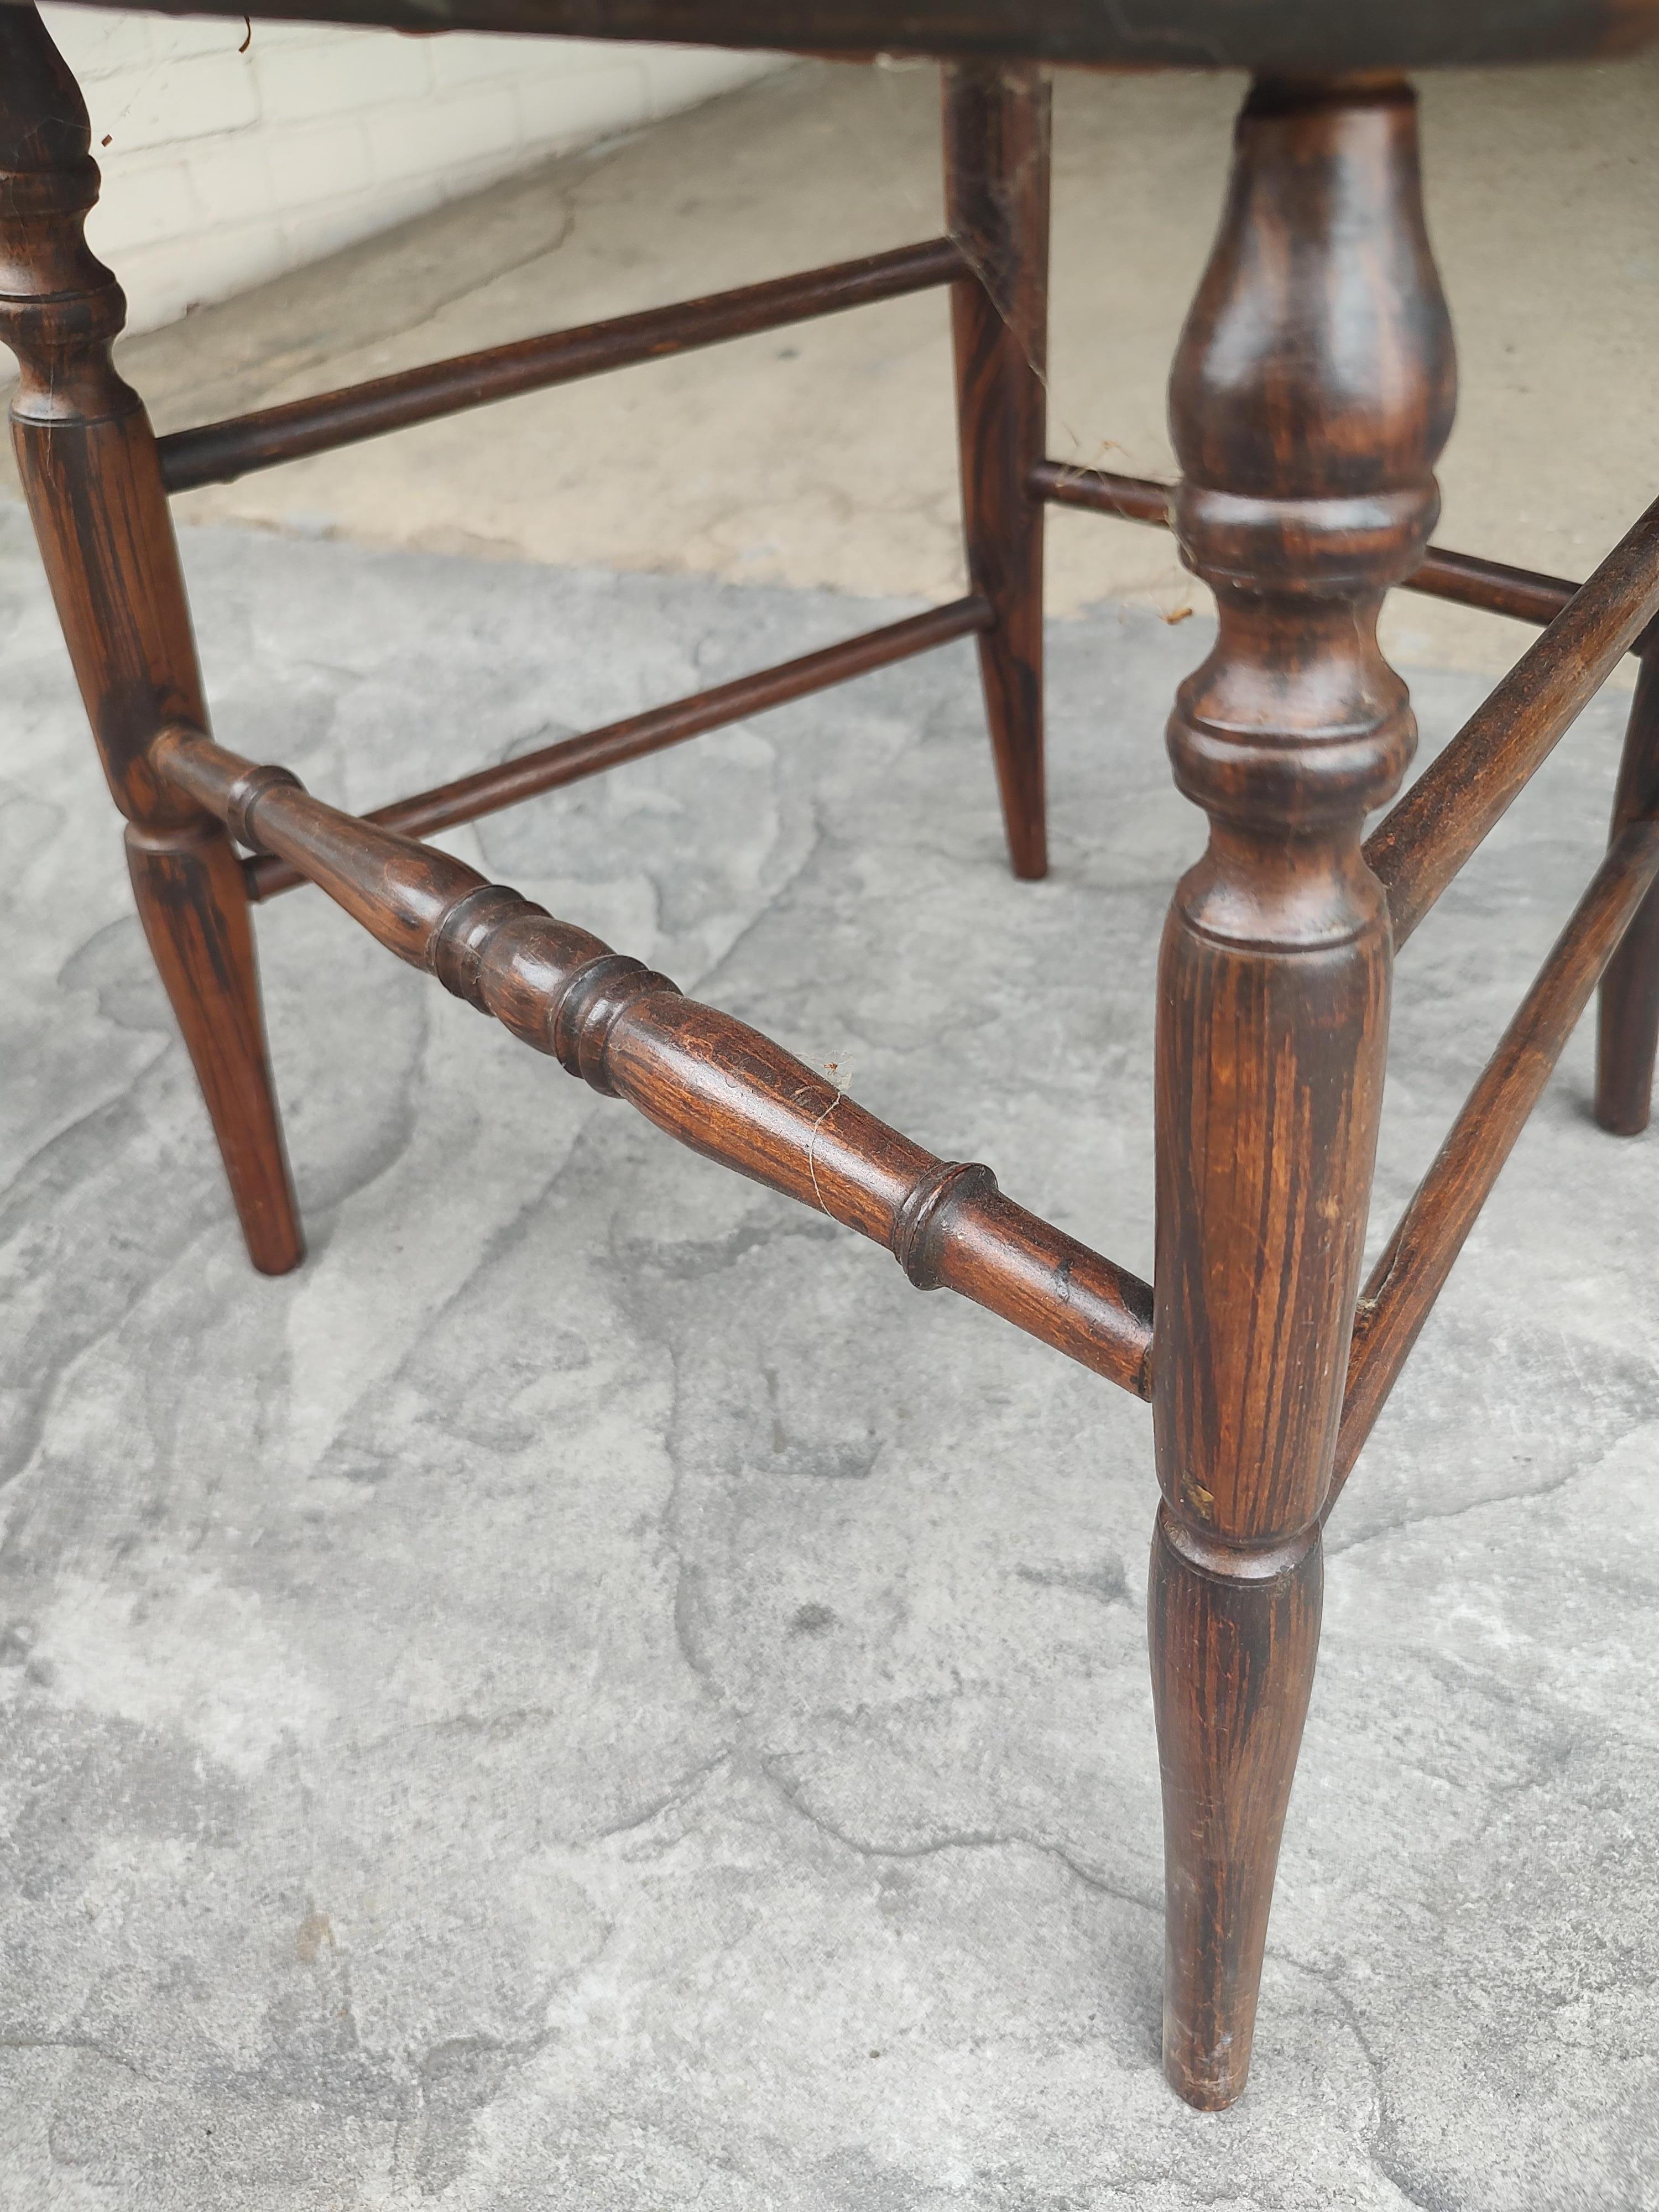 Pair of Mid-19th Century Grain Painted Rosewood Chiavari Chairs with Caned Seats In Good Condition For Sale In Port Jervis, NY